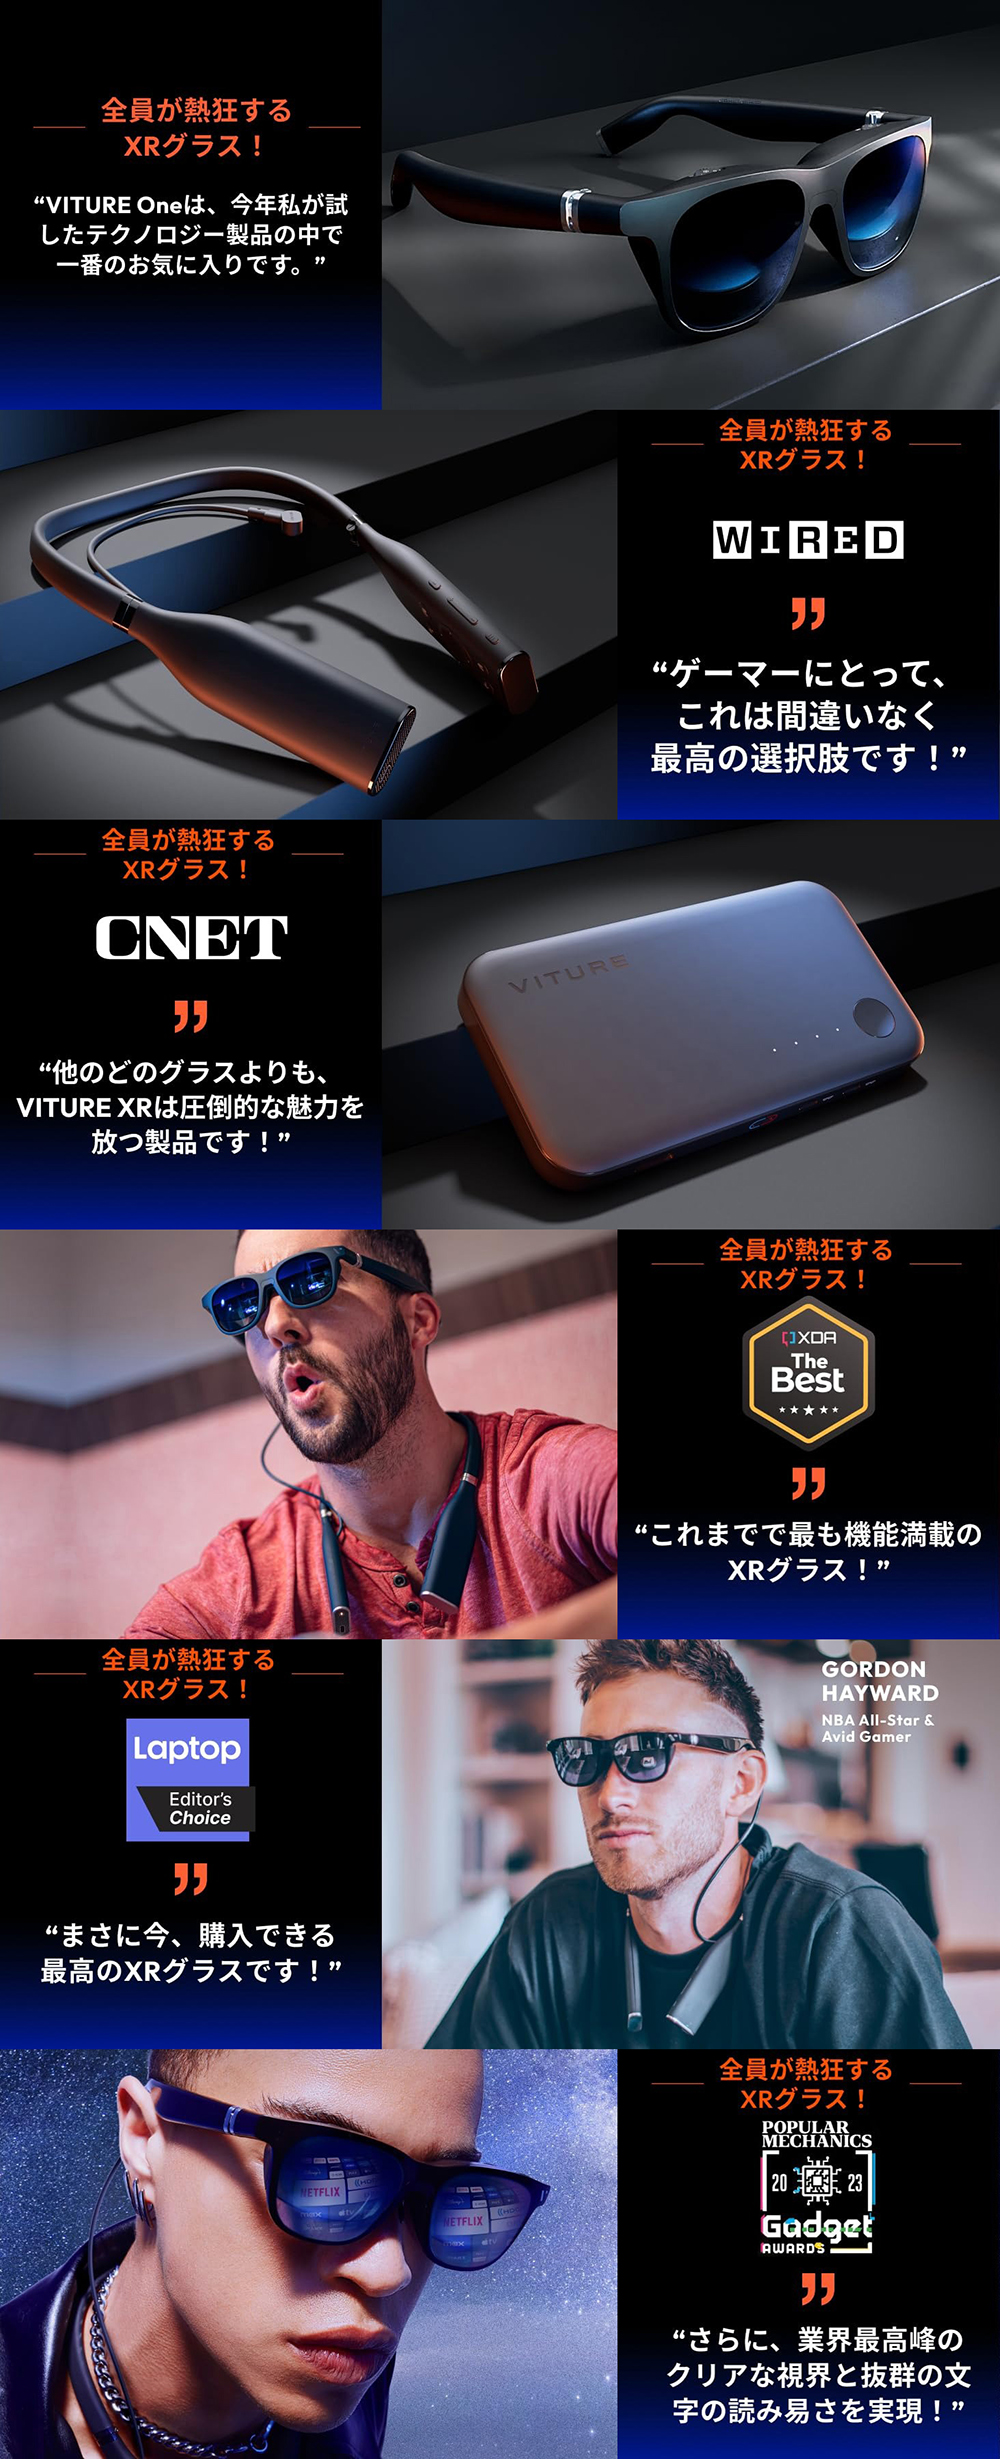 VITURE One ネックバンド 内蔵ストレージ128GB VITURE One XR グラス用 